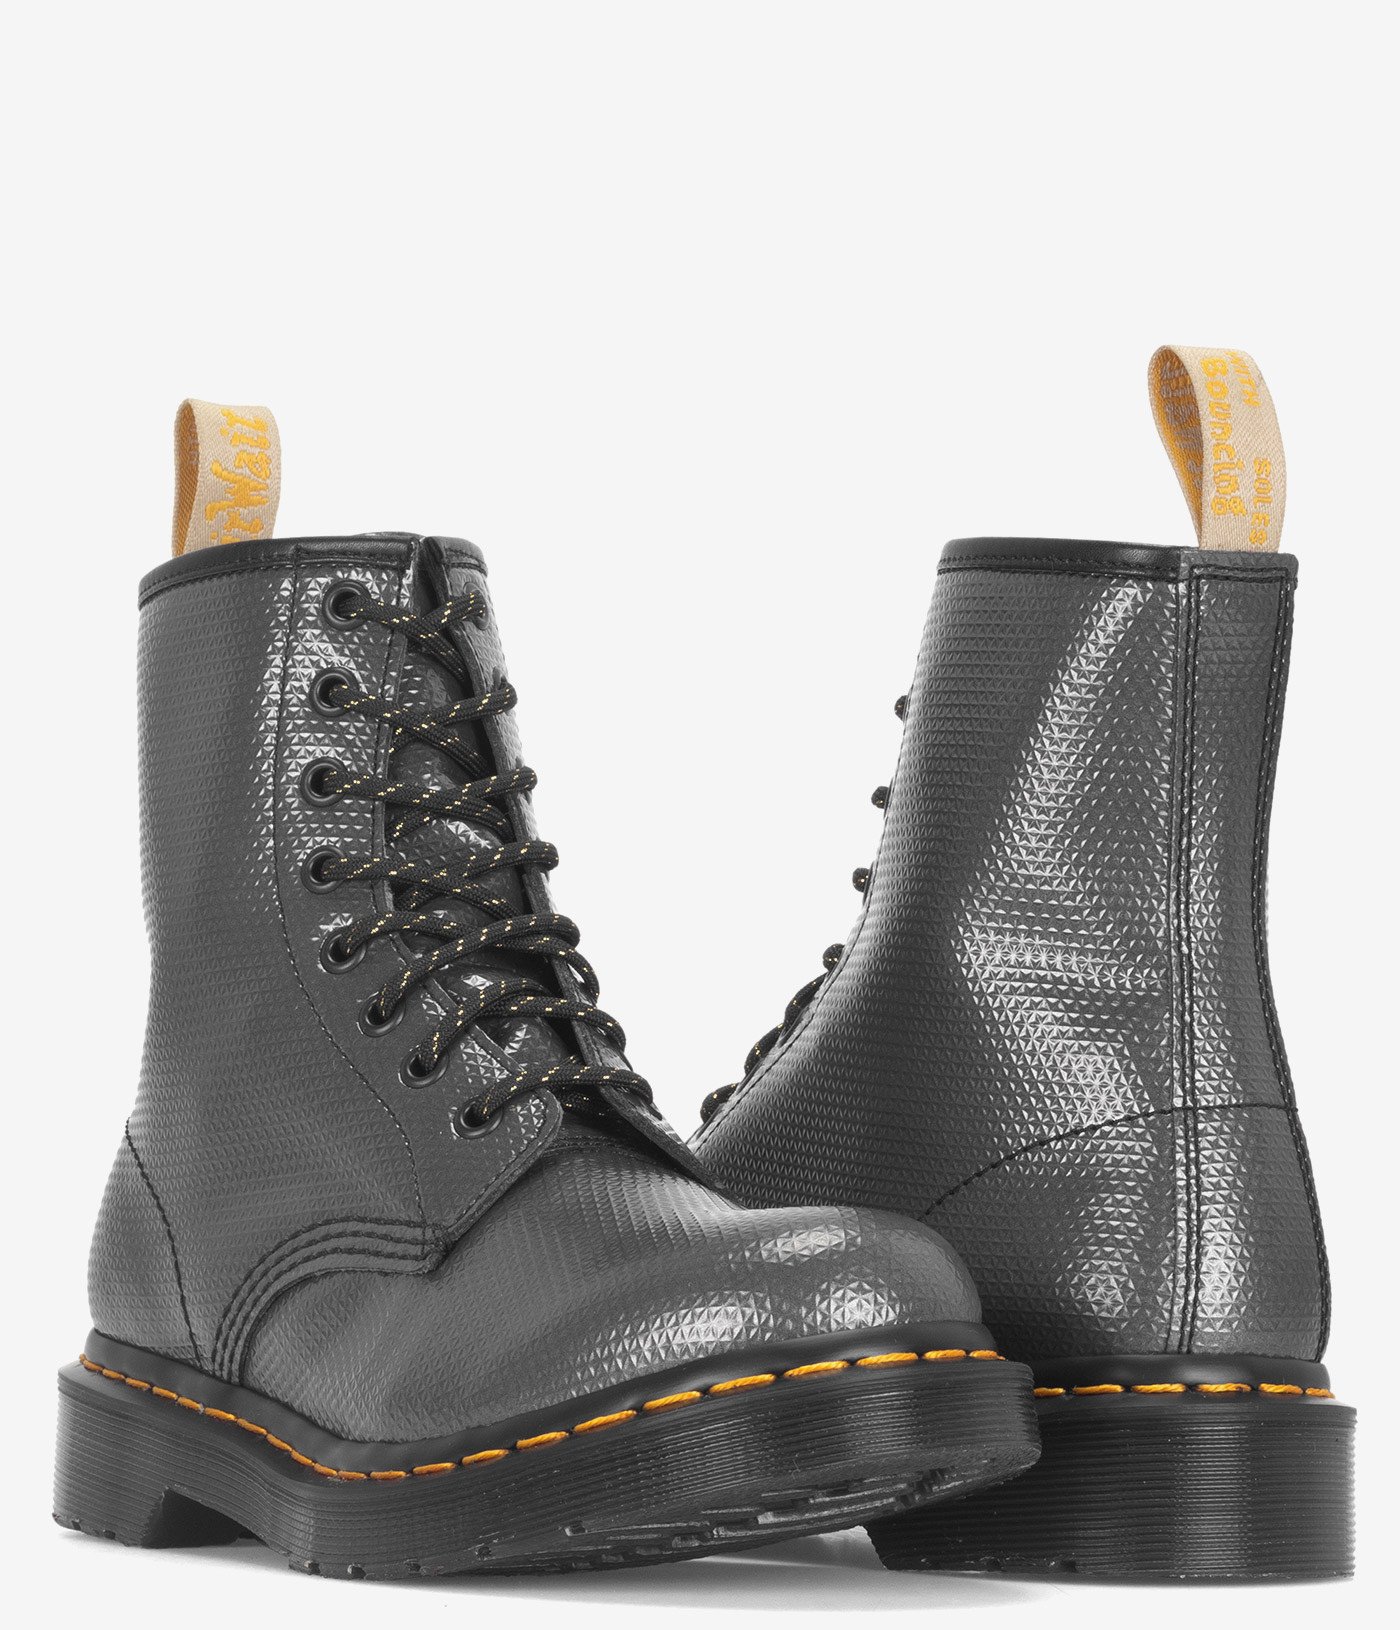 Dr. Martens 1460 Metallic Emboss Lace-Up Boot | Pair